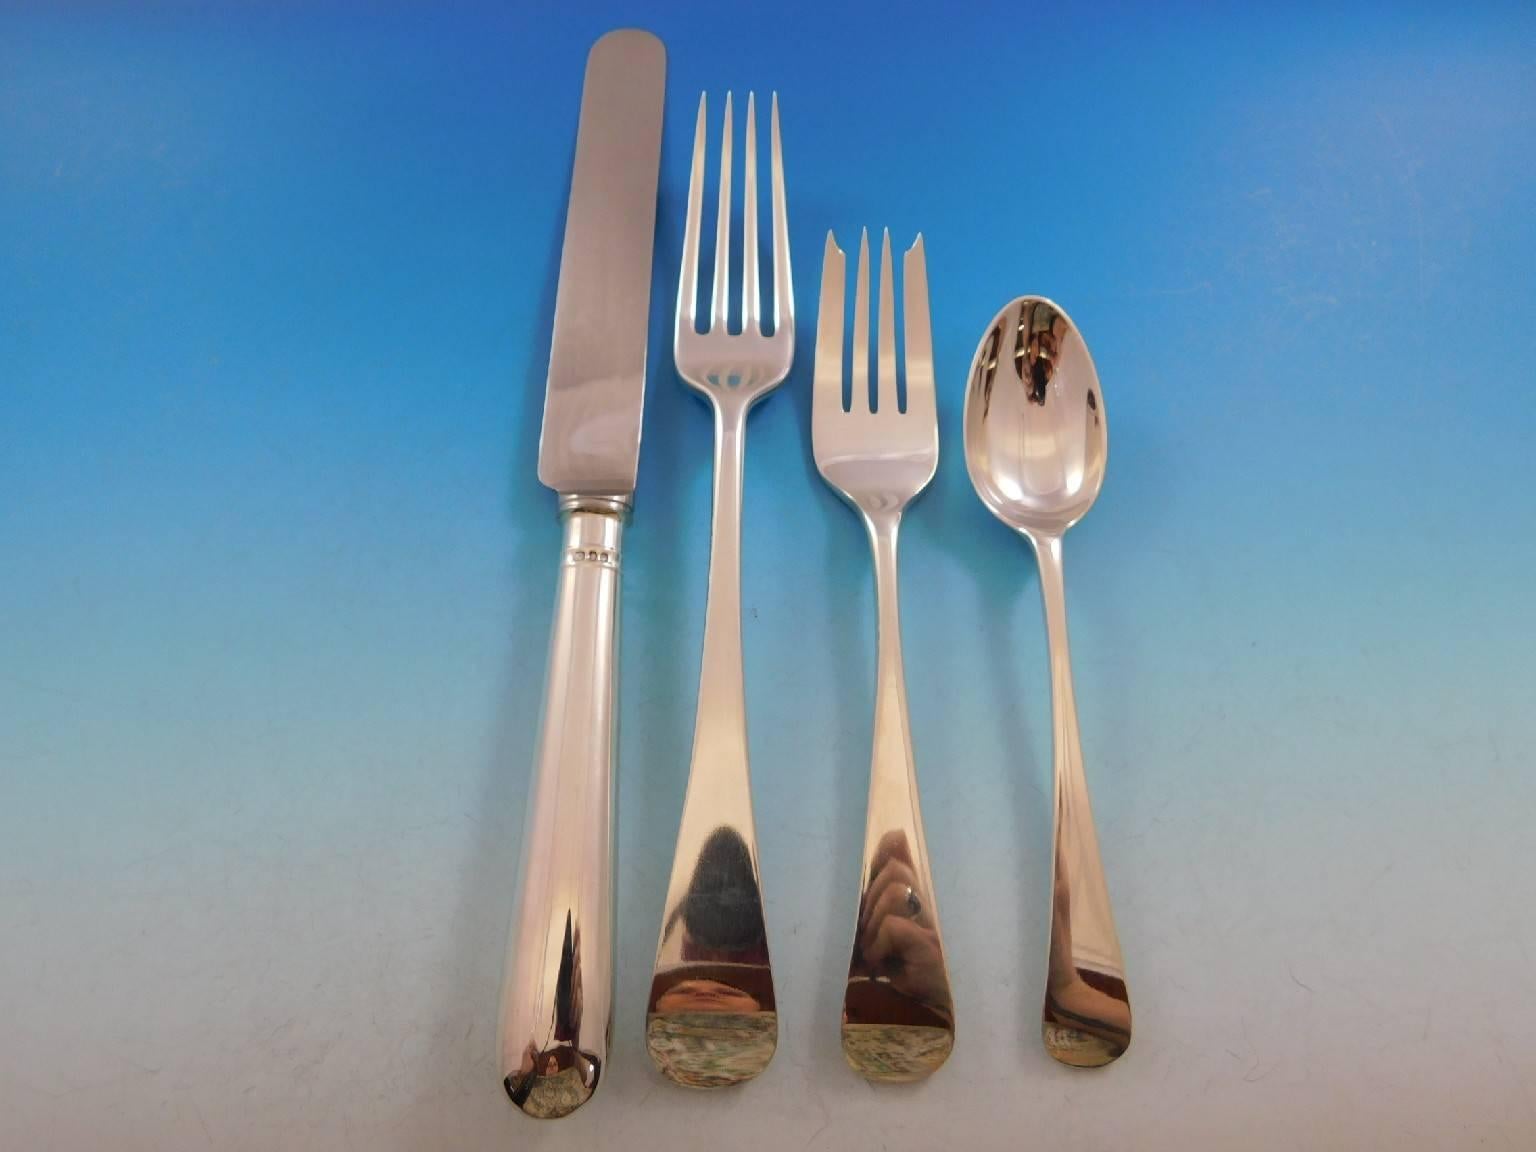 Incredible round English by James Robinson sterling silver flatware set of 179 pieces. This set includes:

24 dinner size knives, 9 3/4